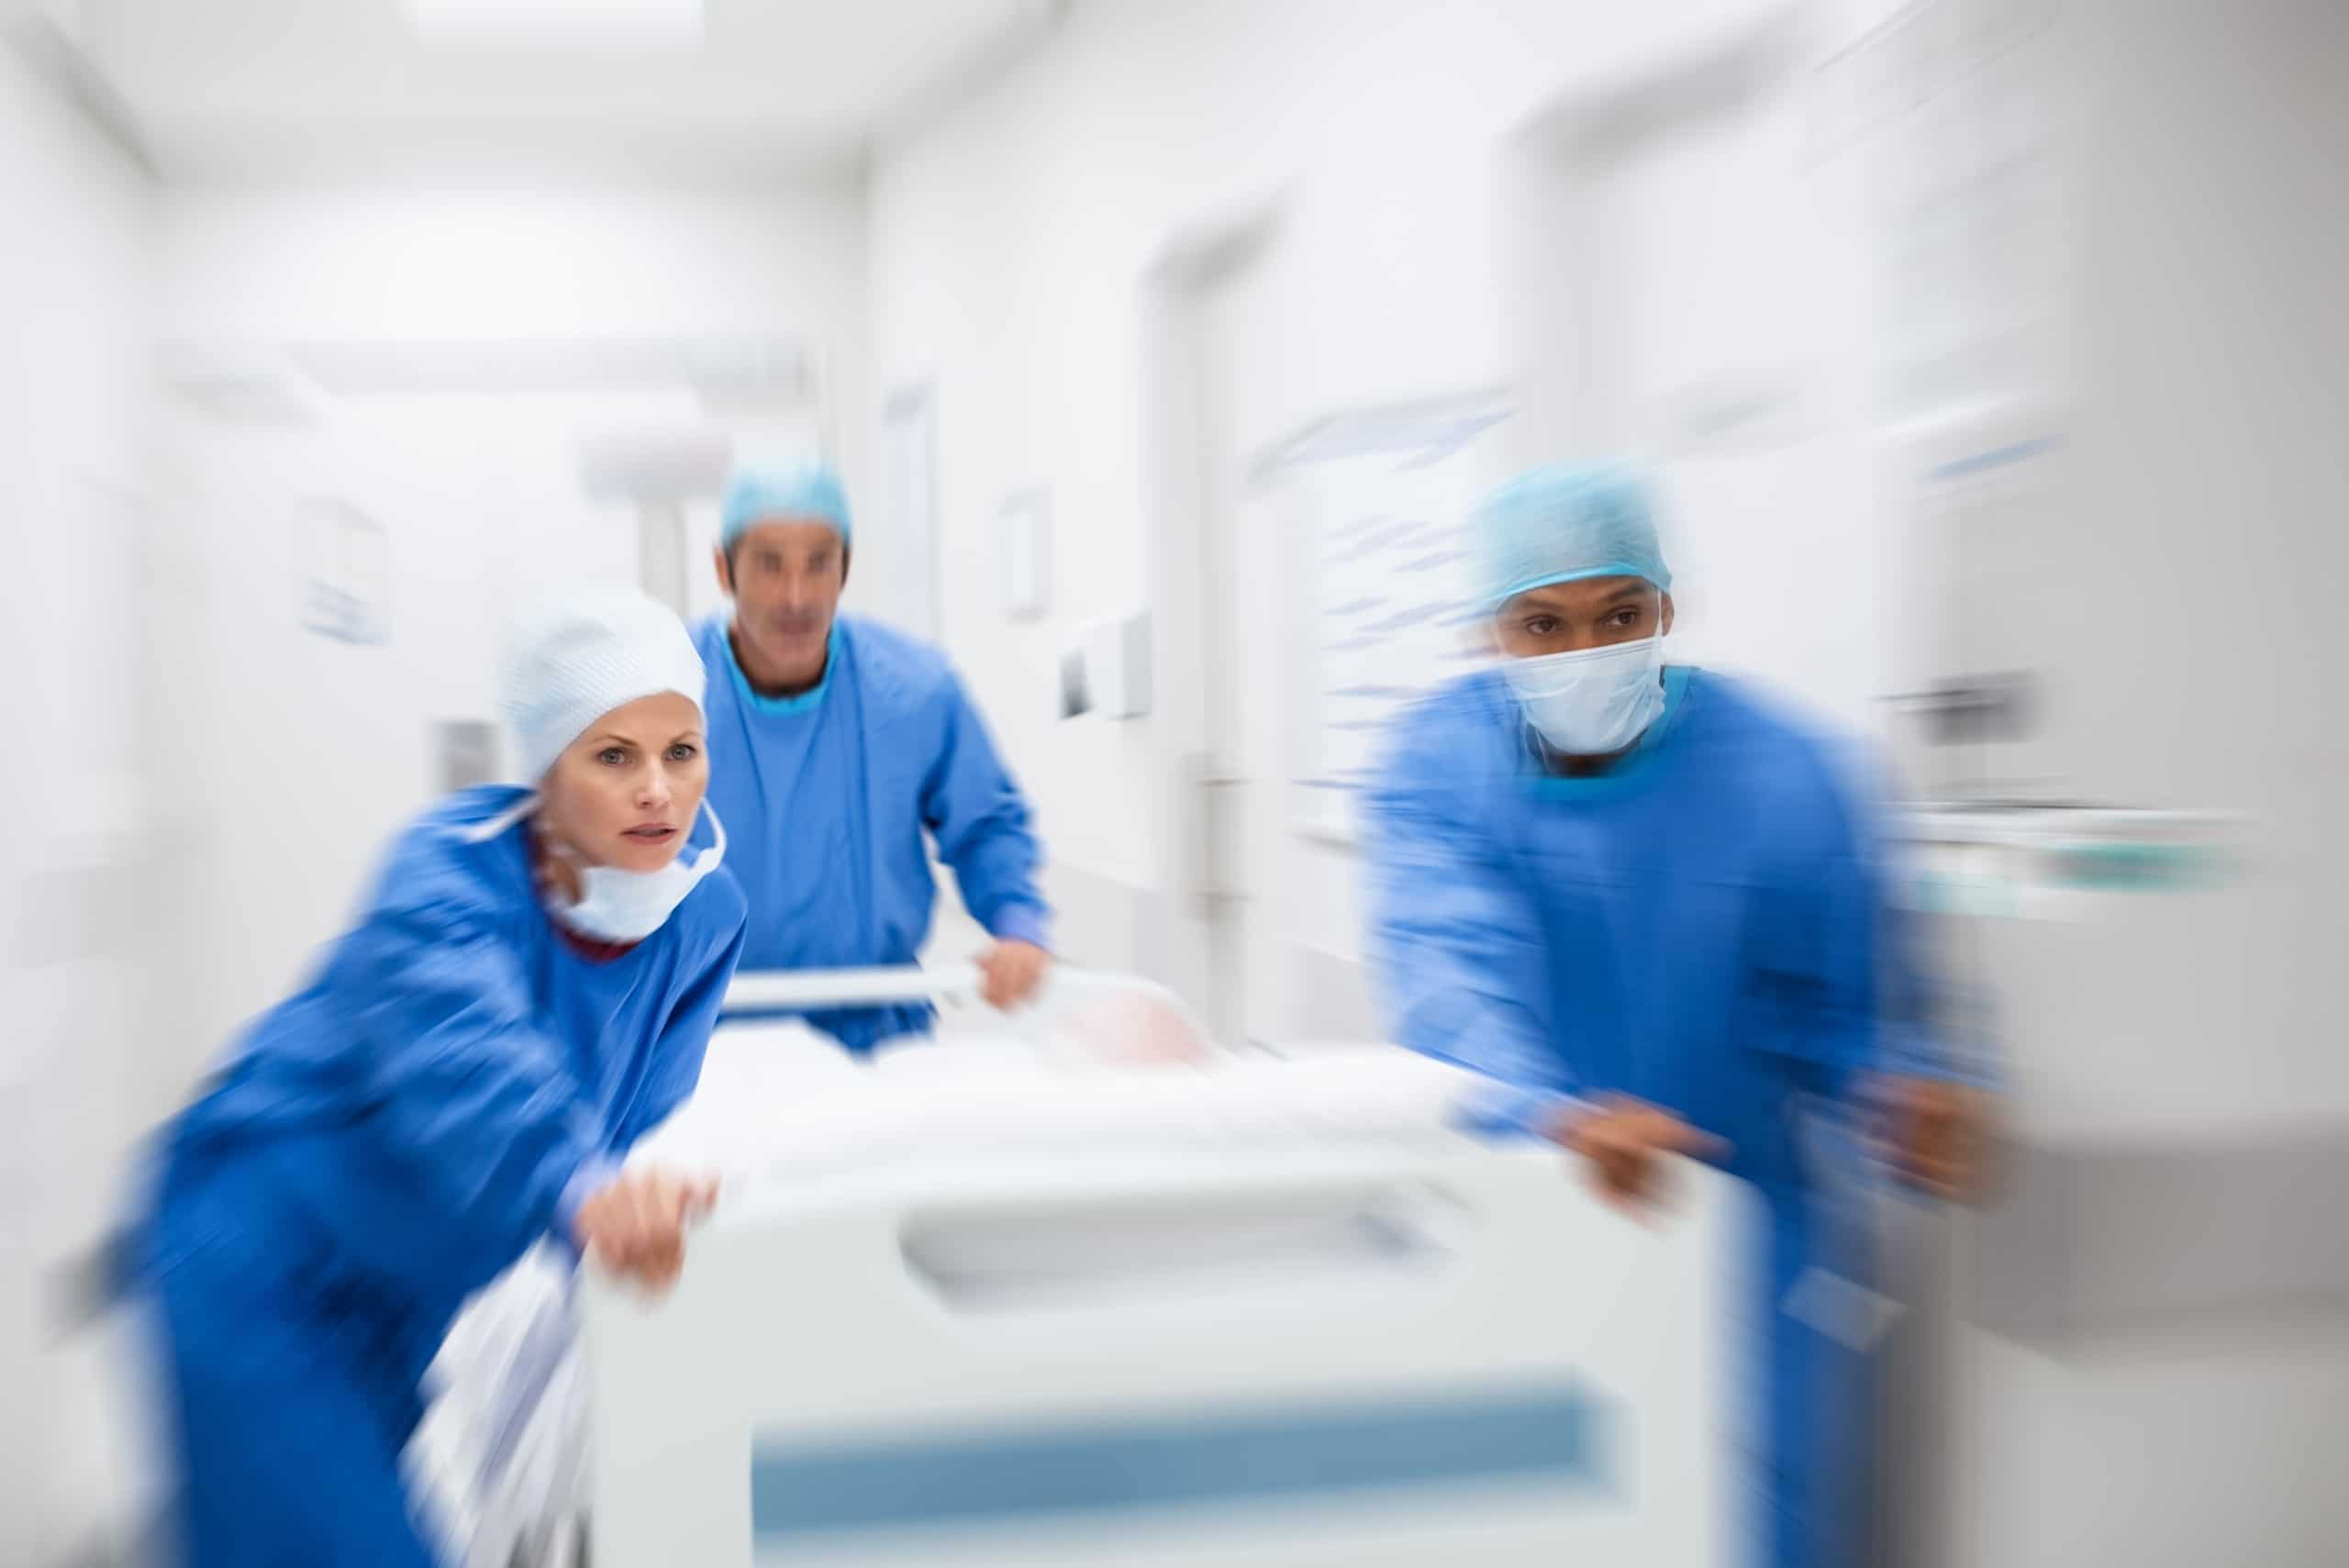 Blurred image of medical professionals in a hallway